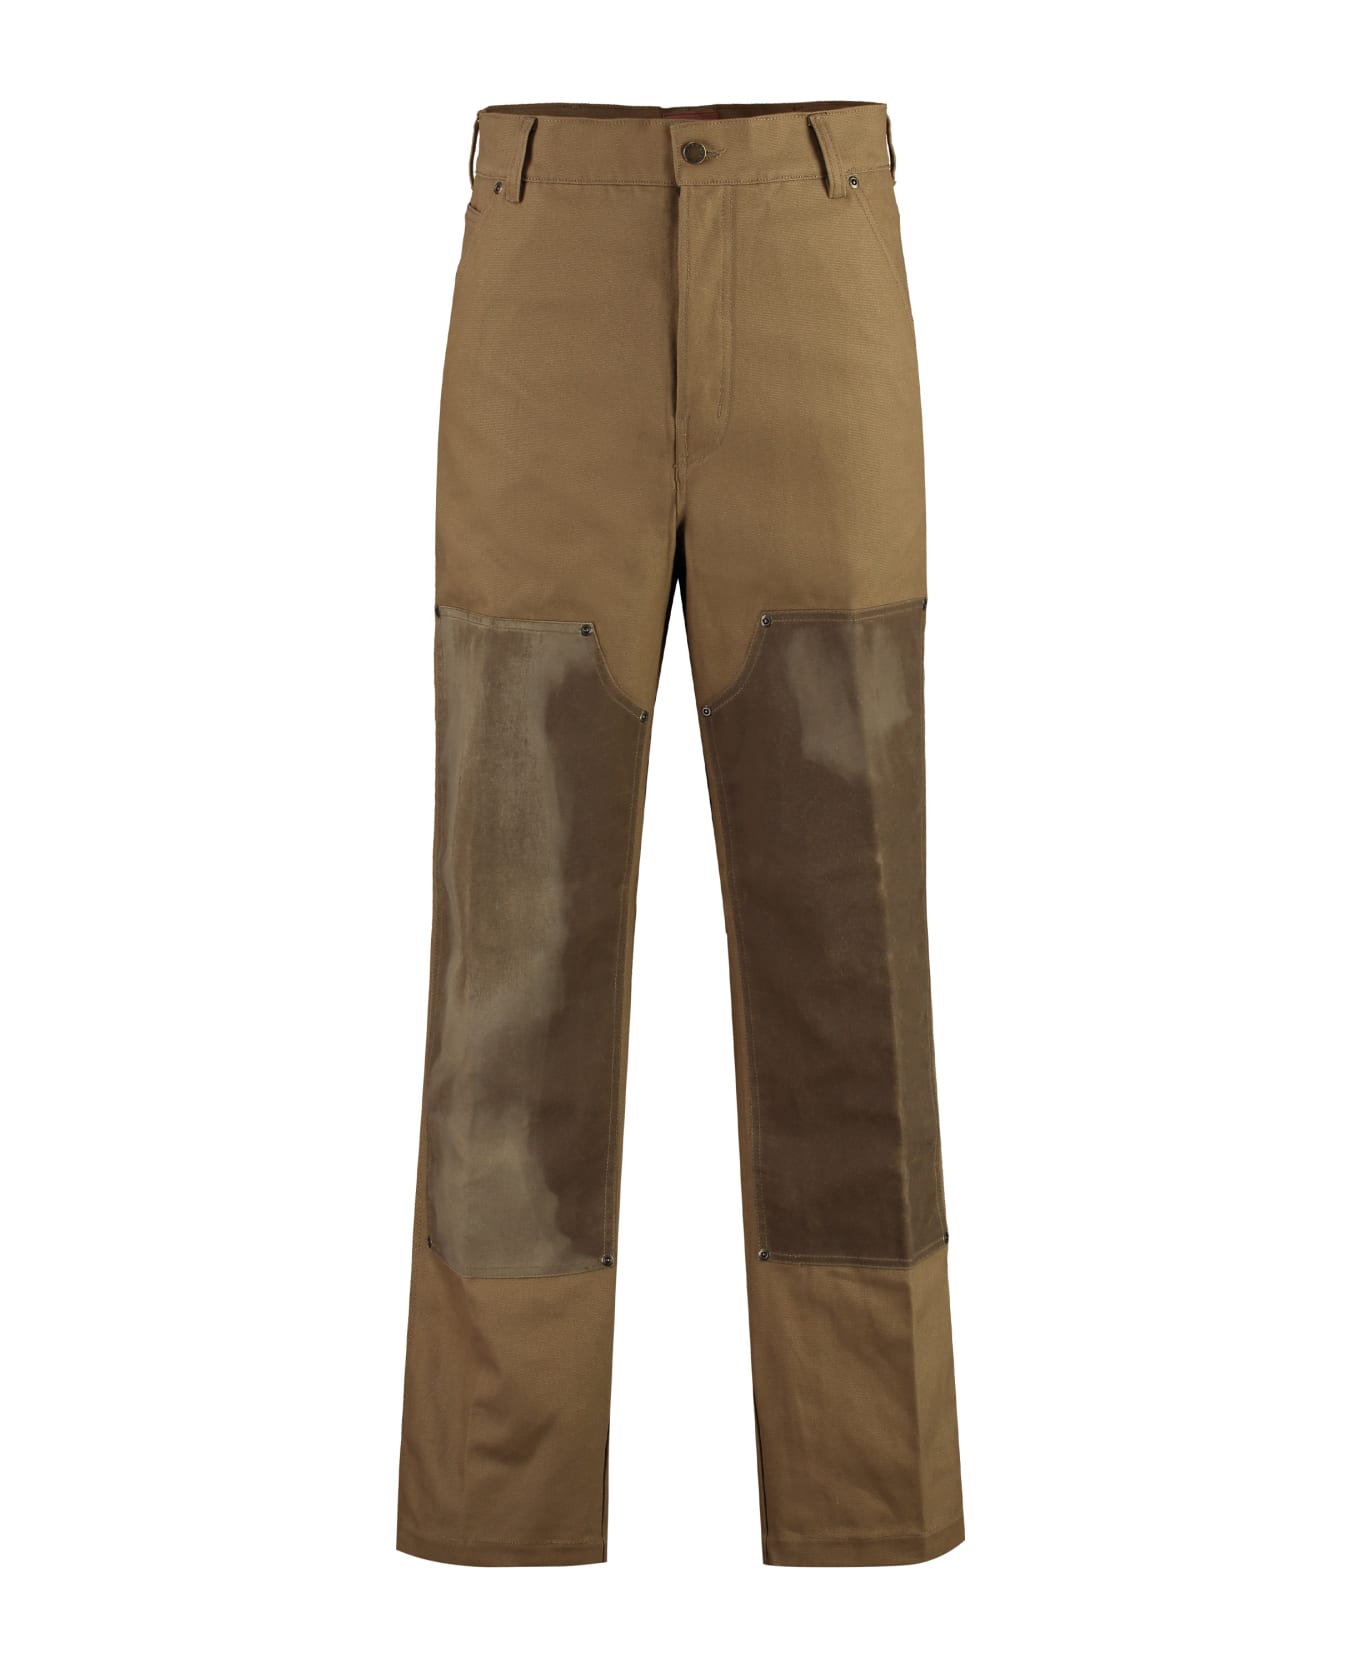 Dickies Lucas Cotton Trousers - brown ボトムス